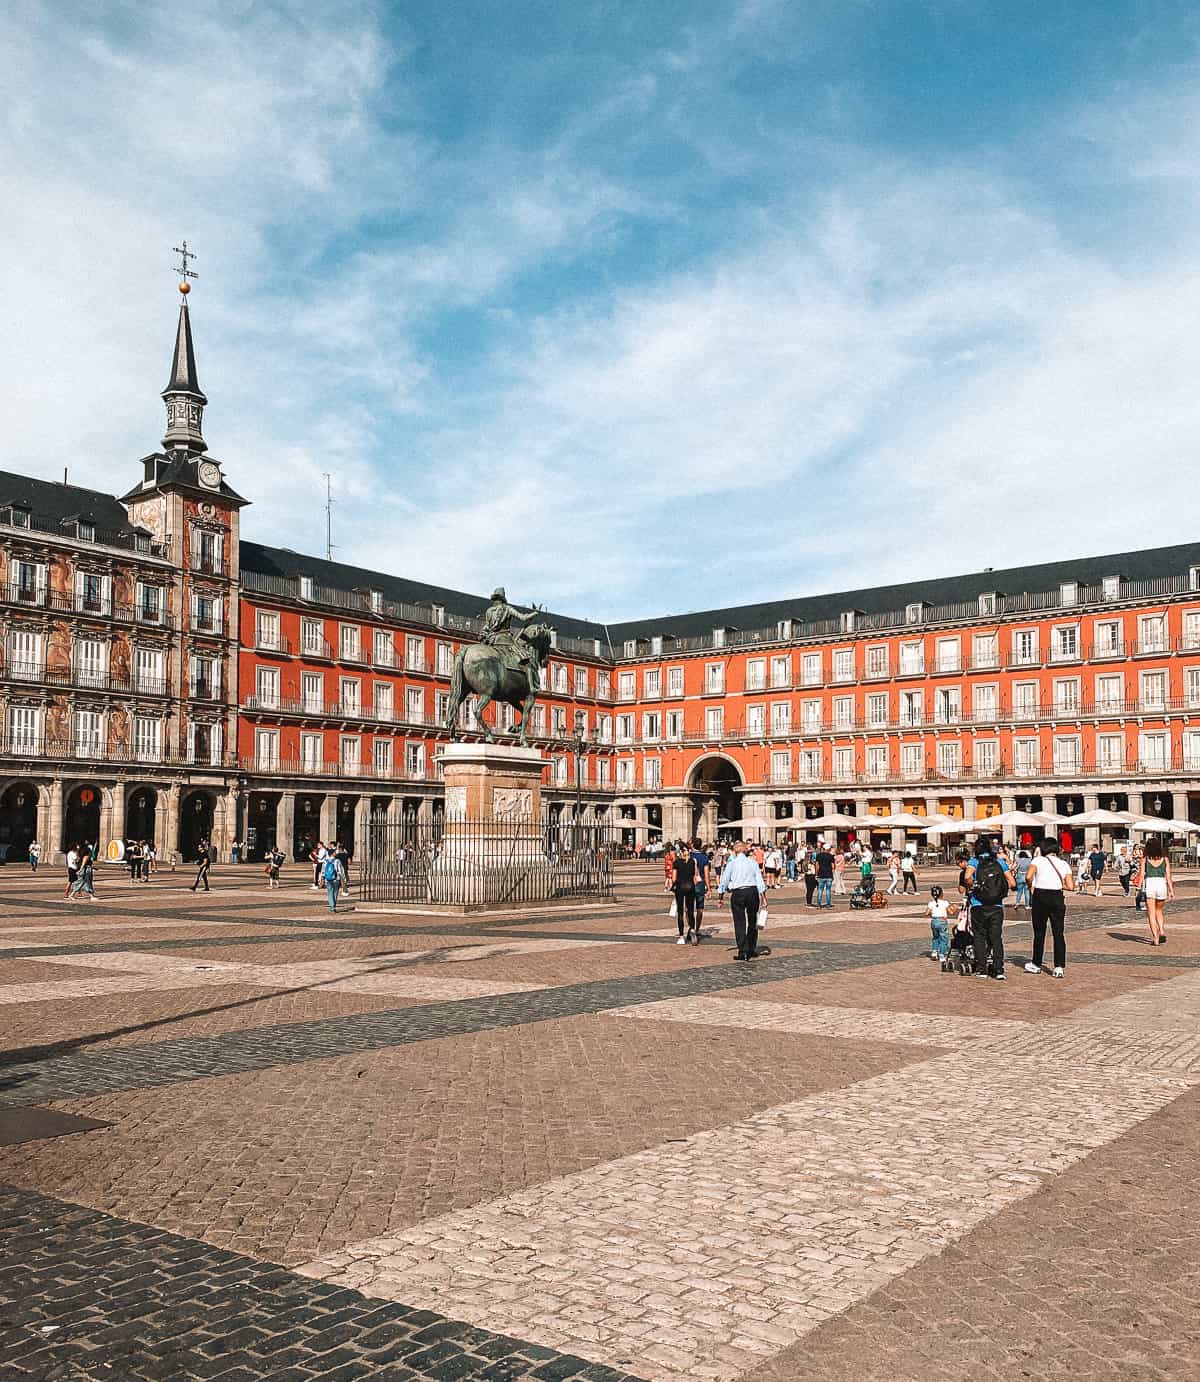 A lively view of Plaza Mayor in Madrid showcasing the statue of King Philip III at the center, with visitors walking around the spacious cobblestone square surrounded by classic red facades and arches.